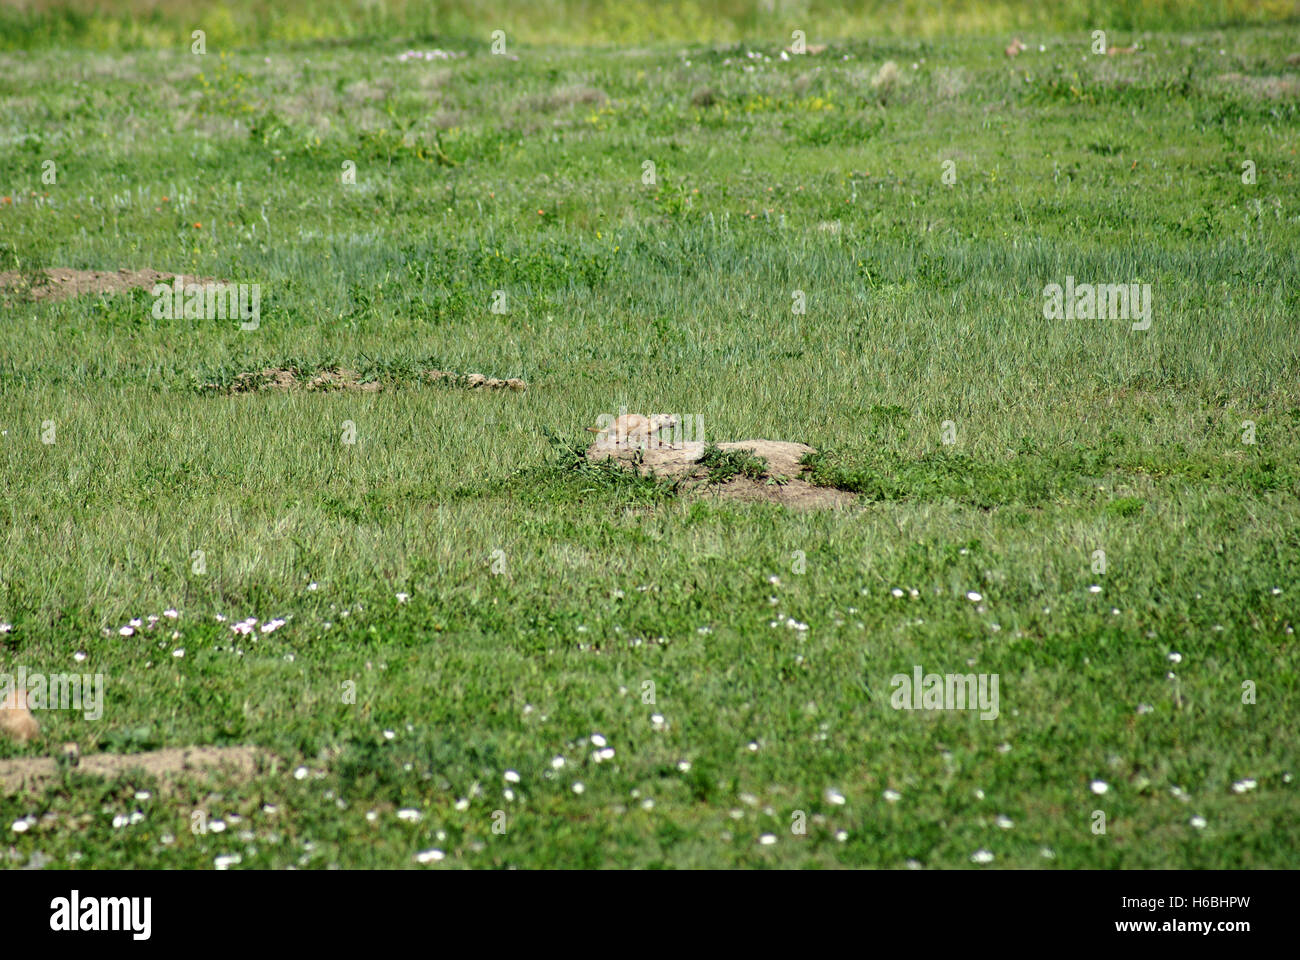 A Black-Tailed Prairie Dog in the South Dakota Bad Lands Stock Photo